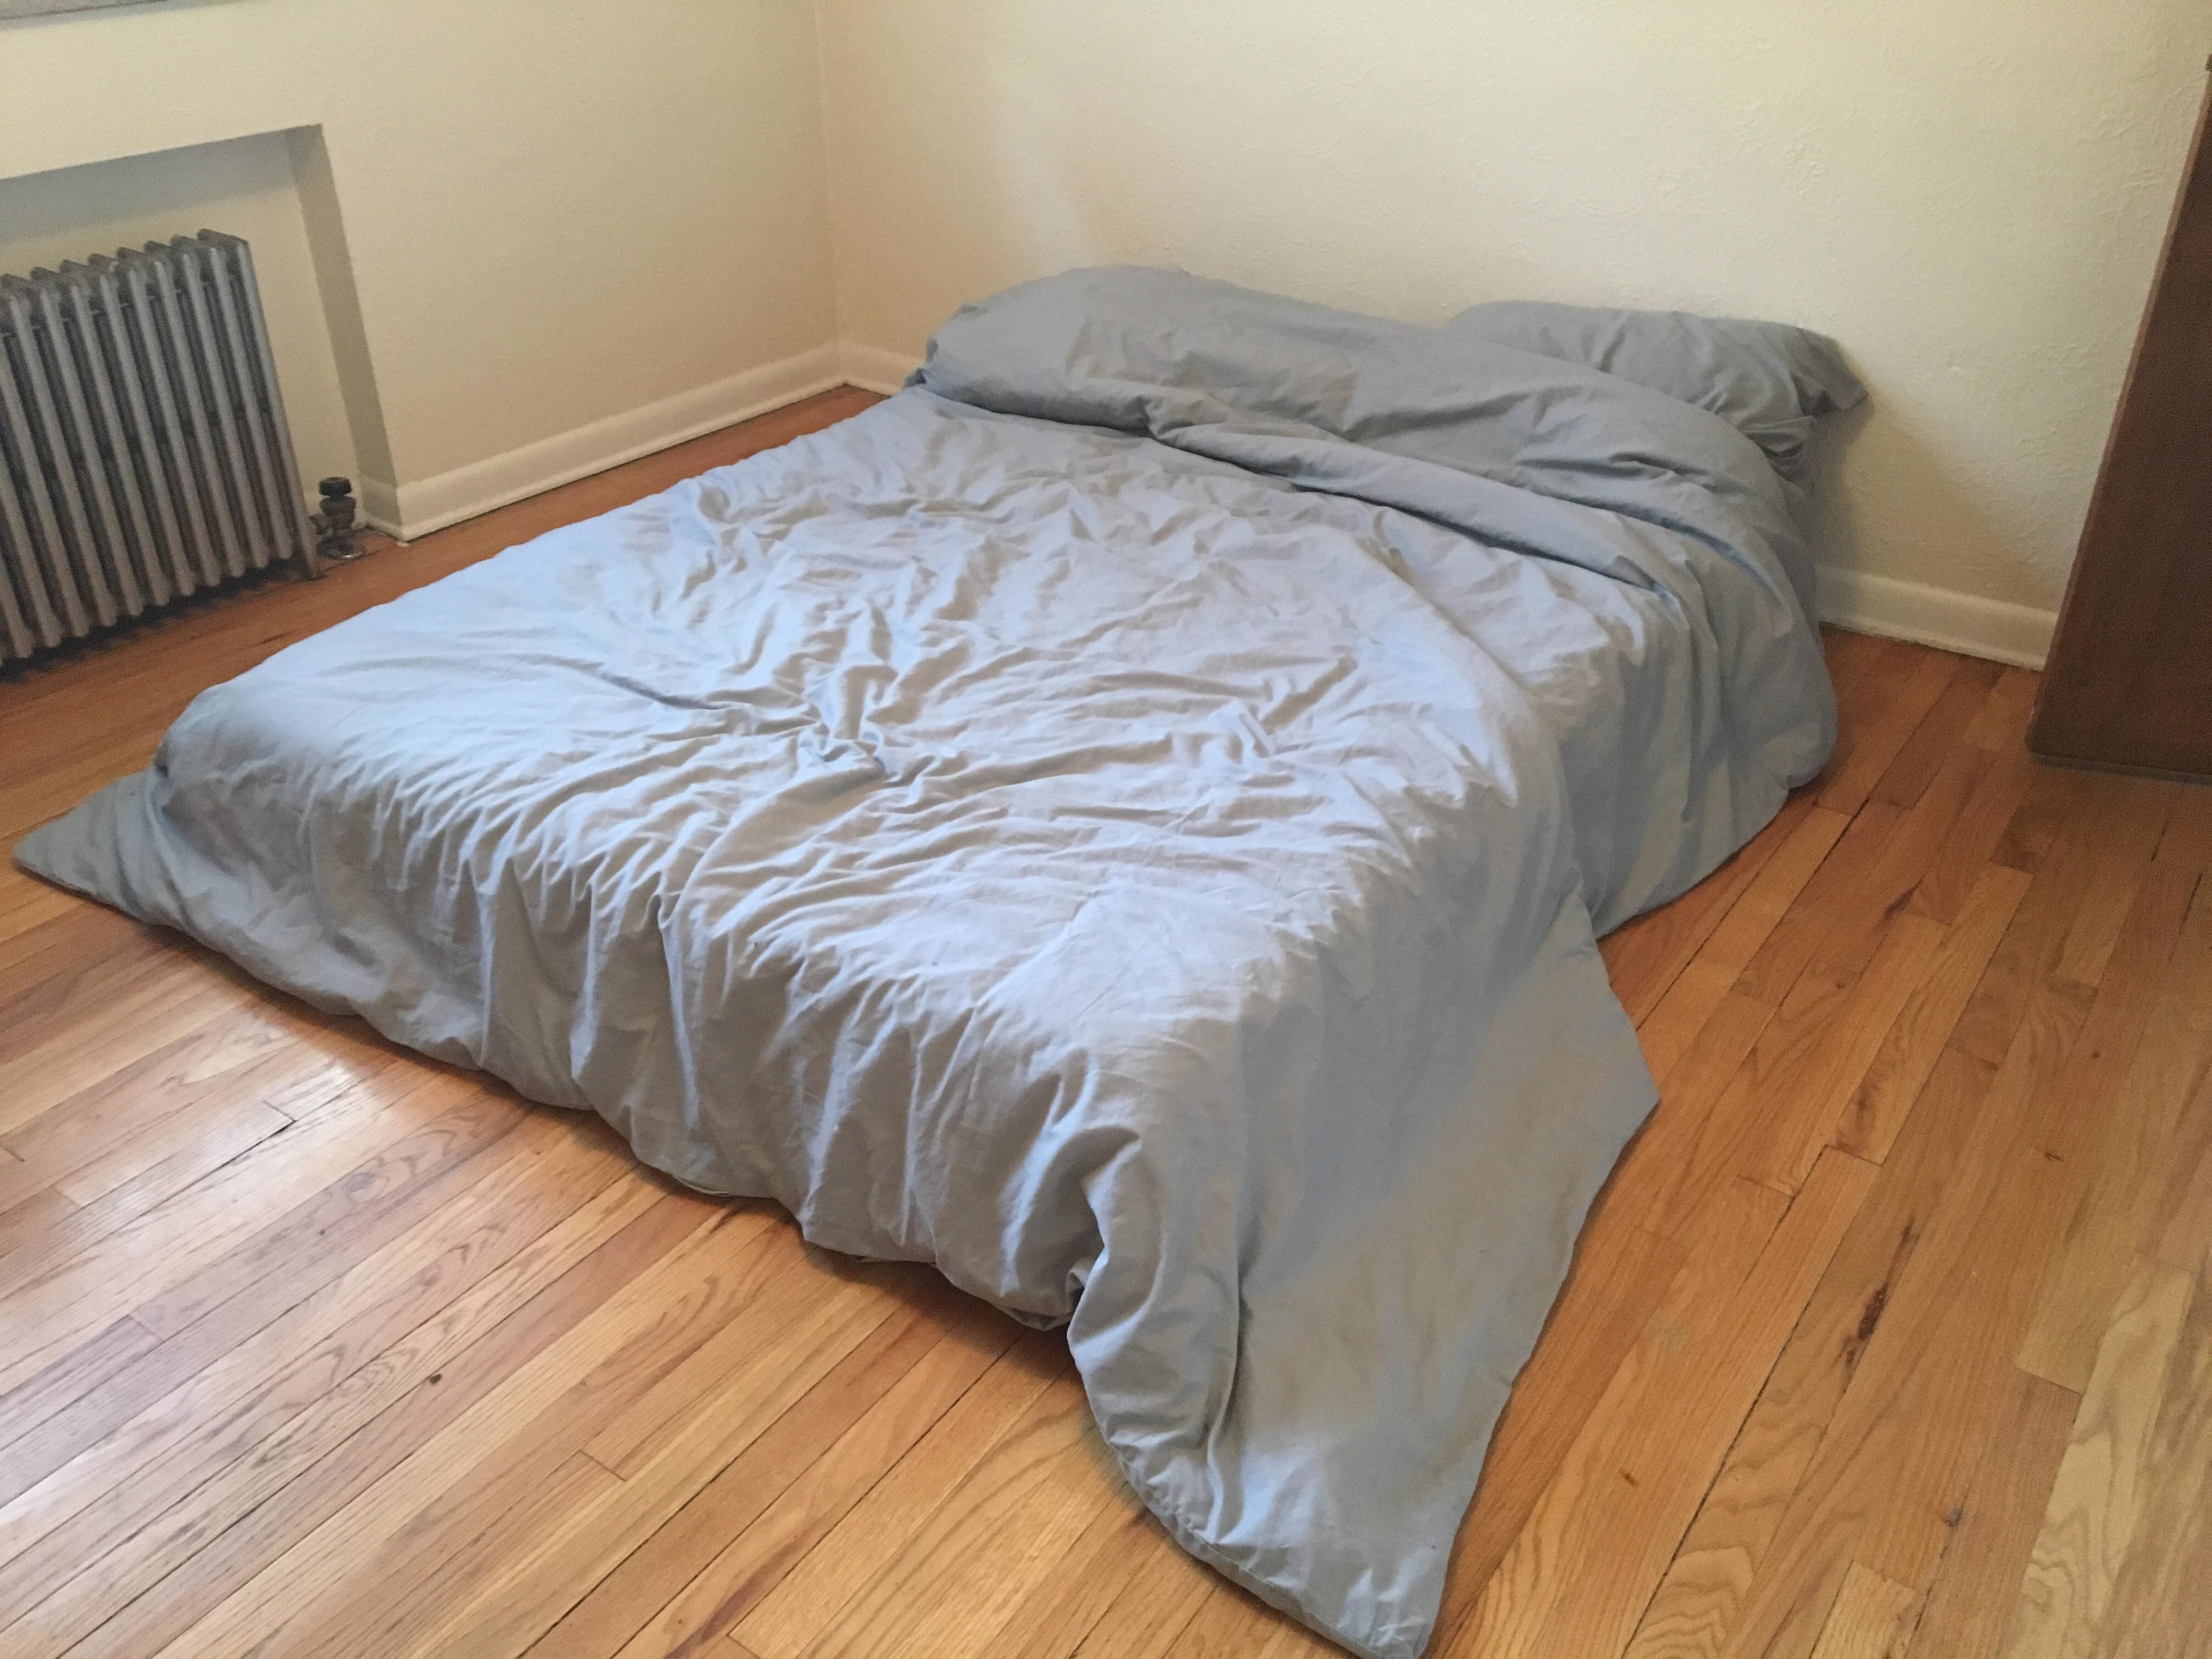 Unmade bed with a grey duvet on a wooden floor